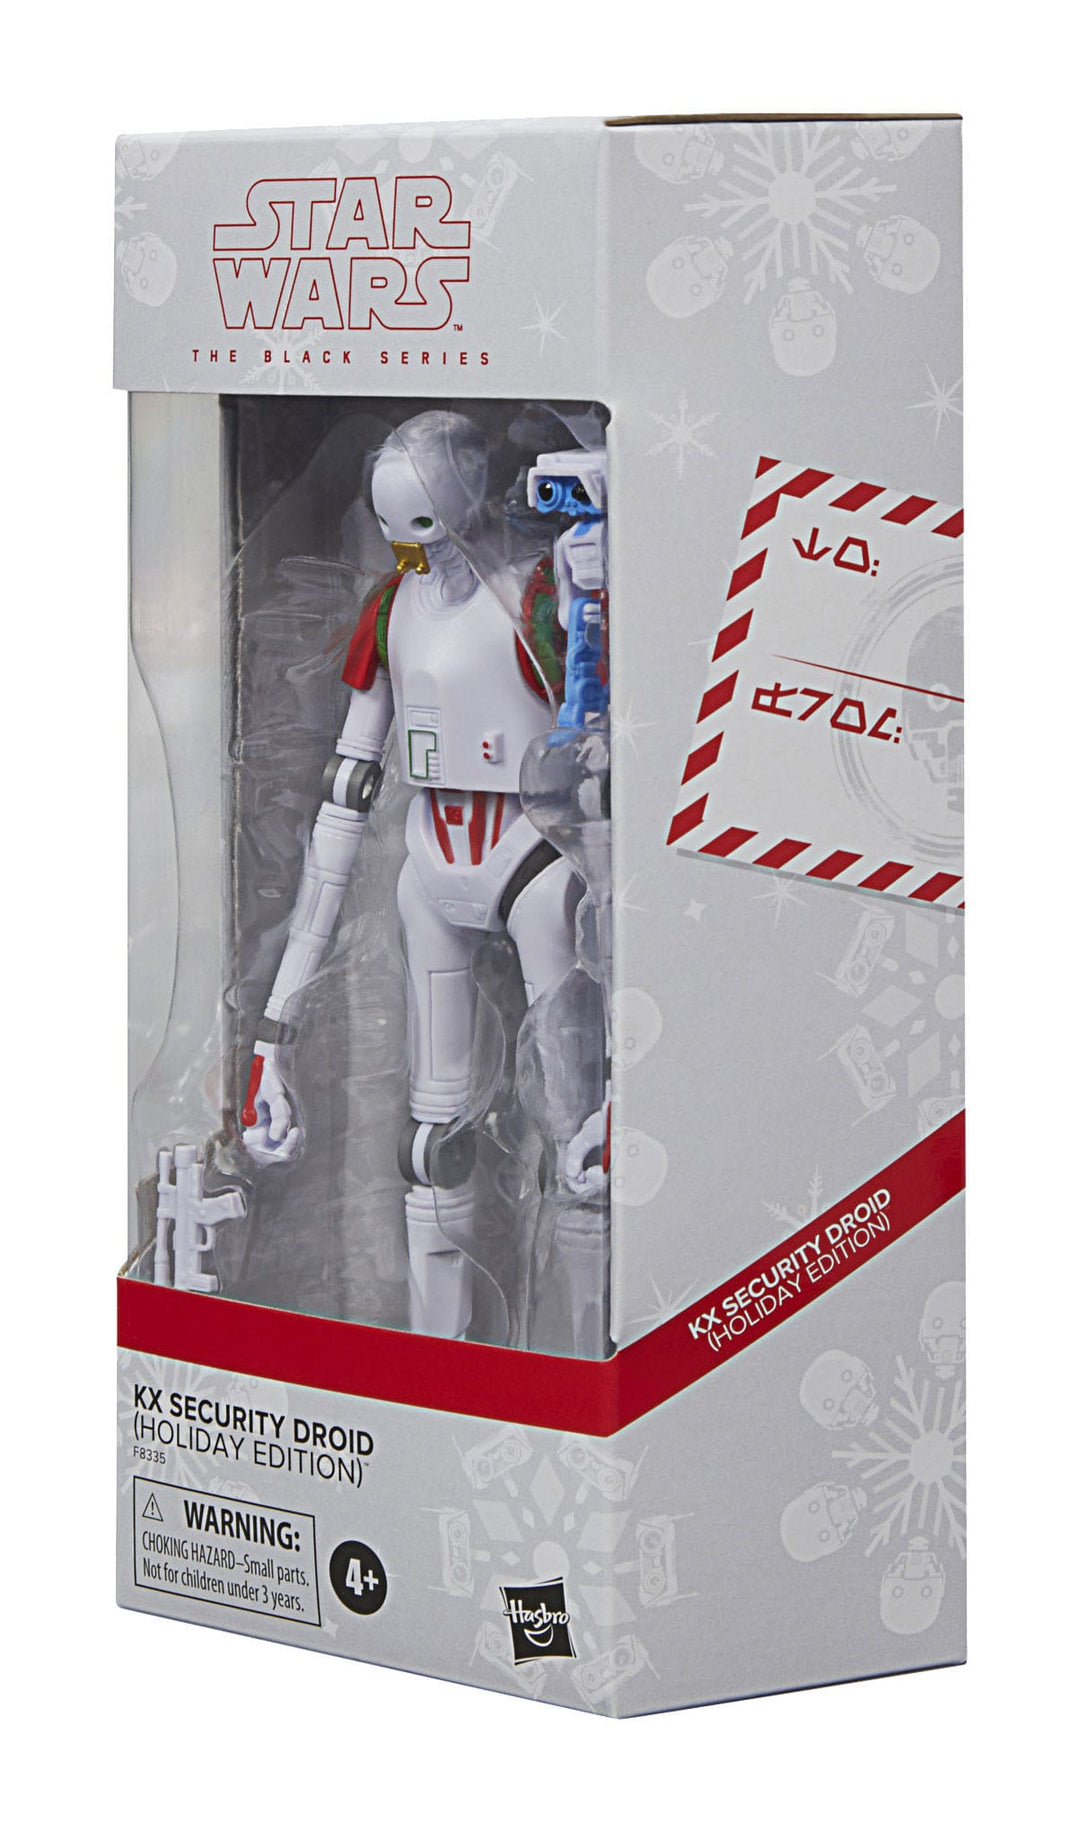 Star Wars The Black Series KX Security Droid (Holiday Edition) 6" Action Figure